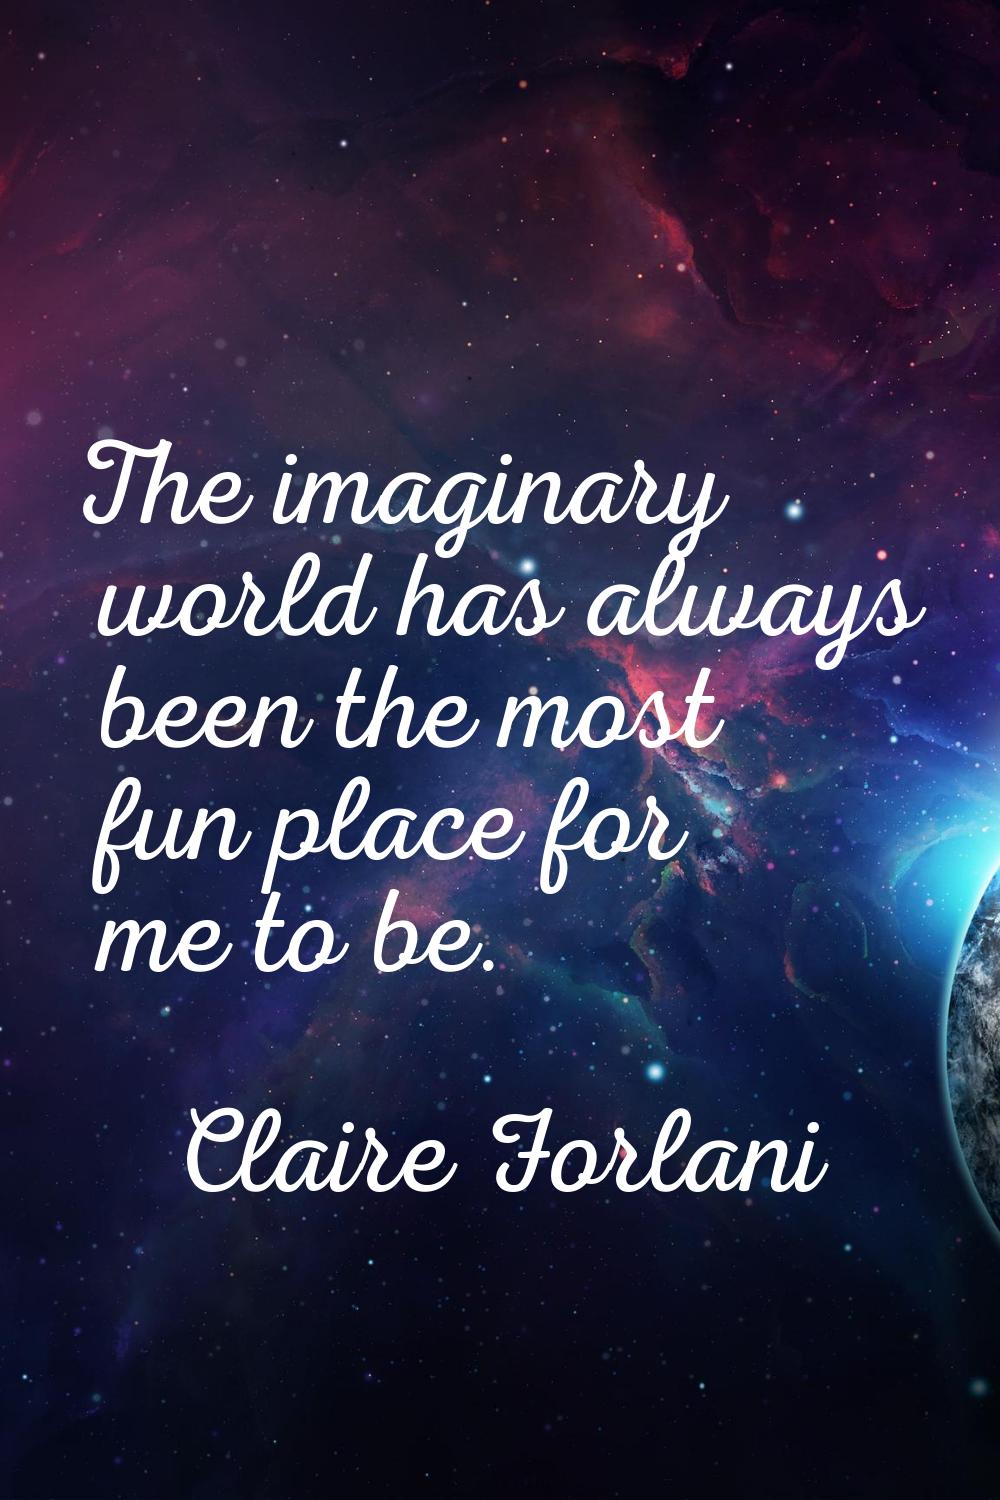 The imaginary world has always been the most fun place for me to be.